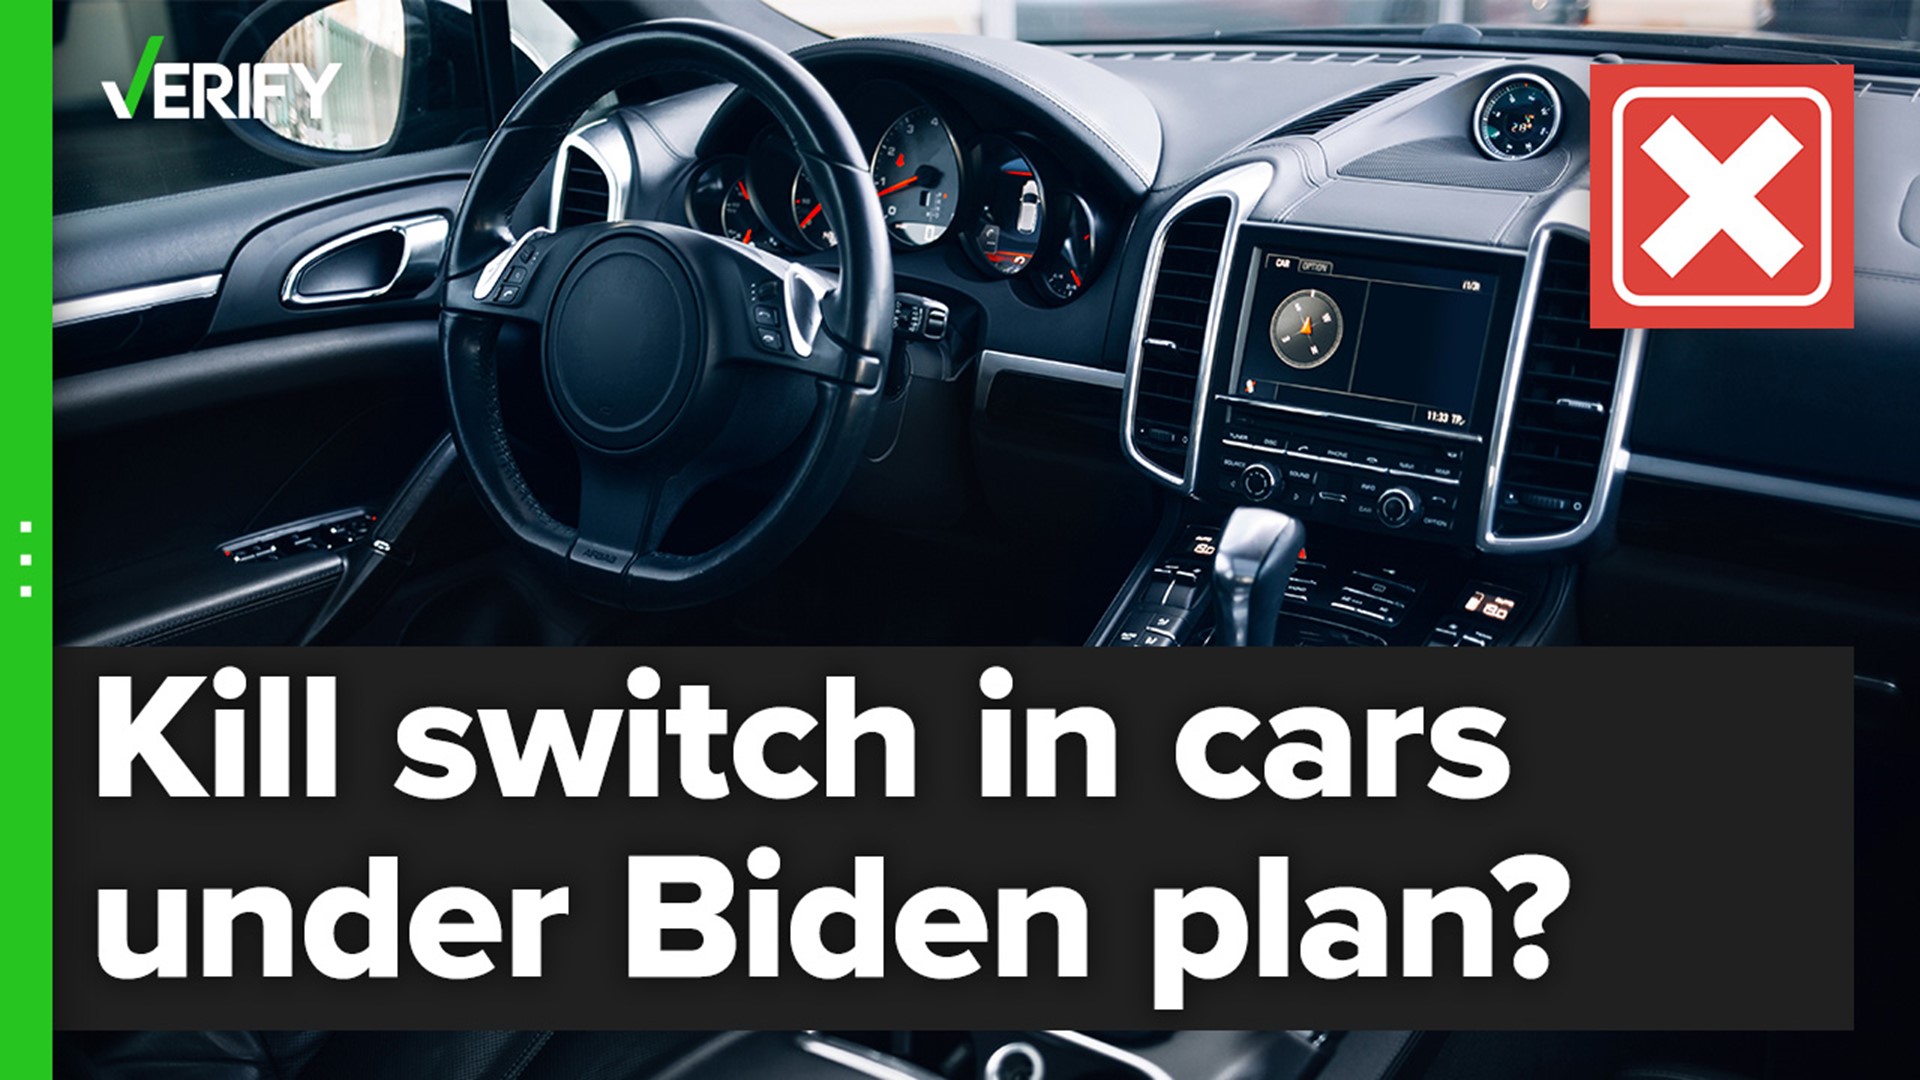 Biden’s infrastructure deal requires drunk driving prevention technology in new cars, but police won’t have remote access to a “kill switch.”